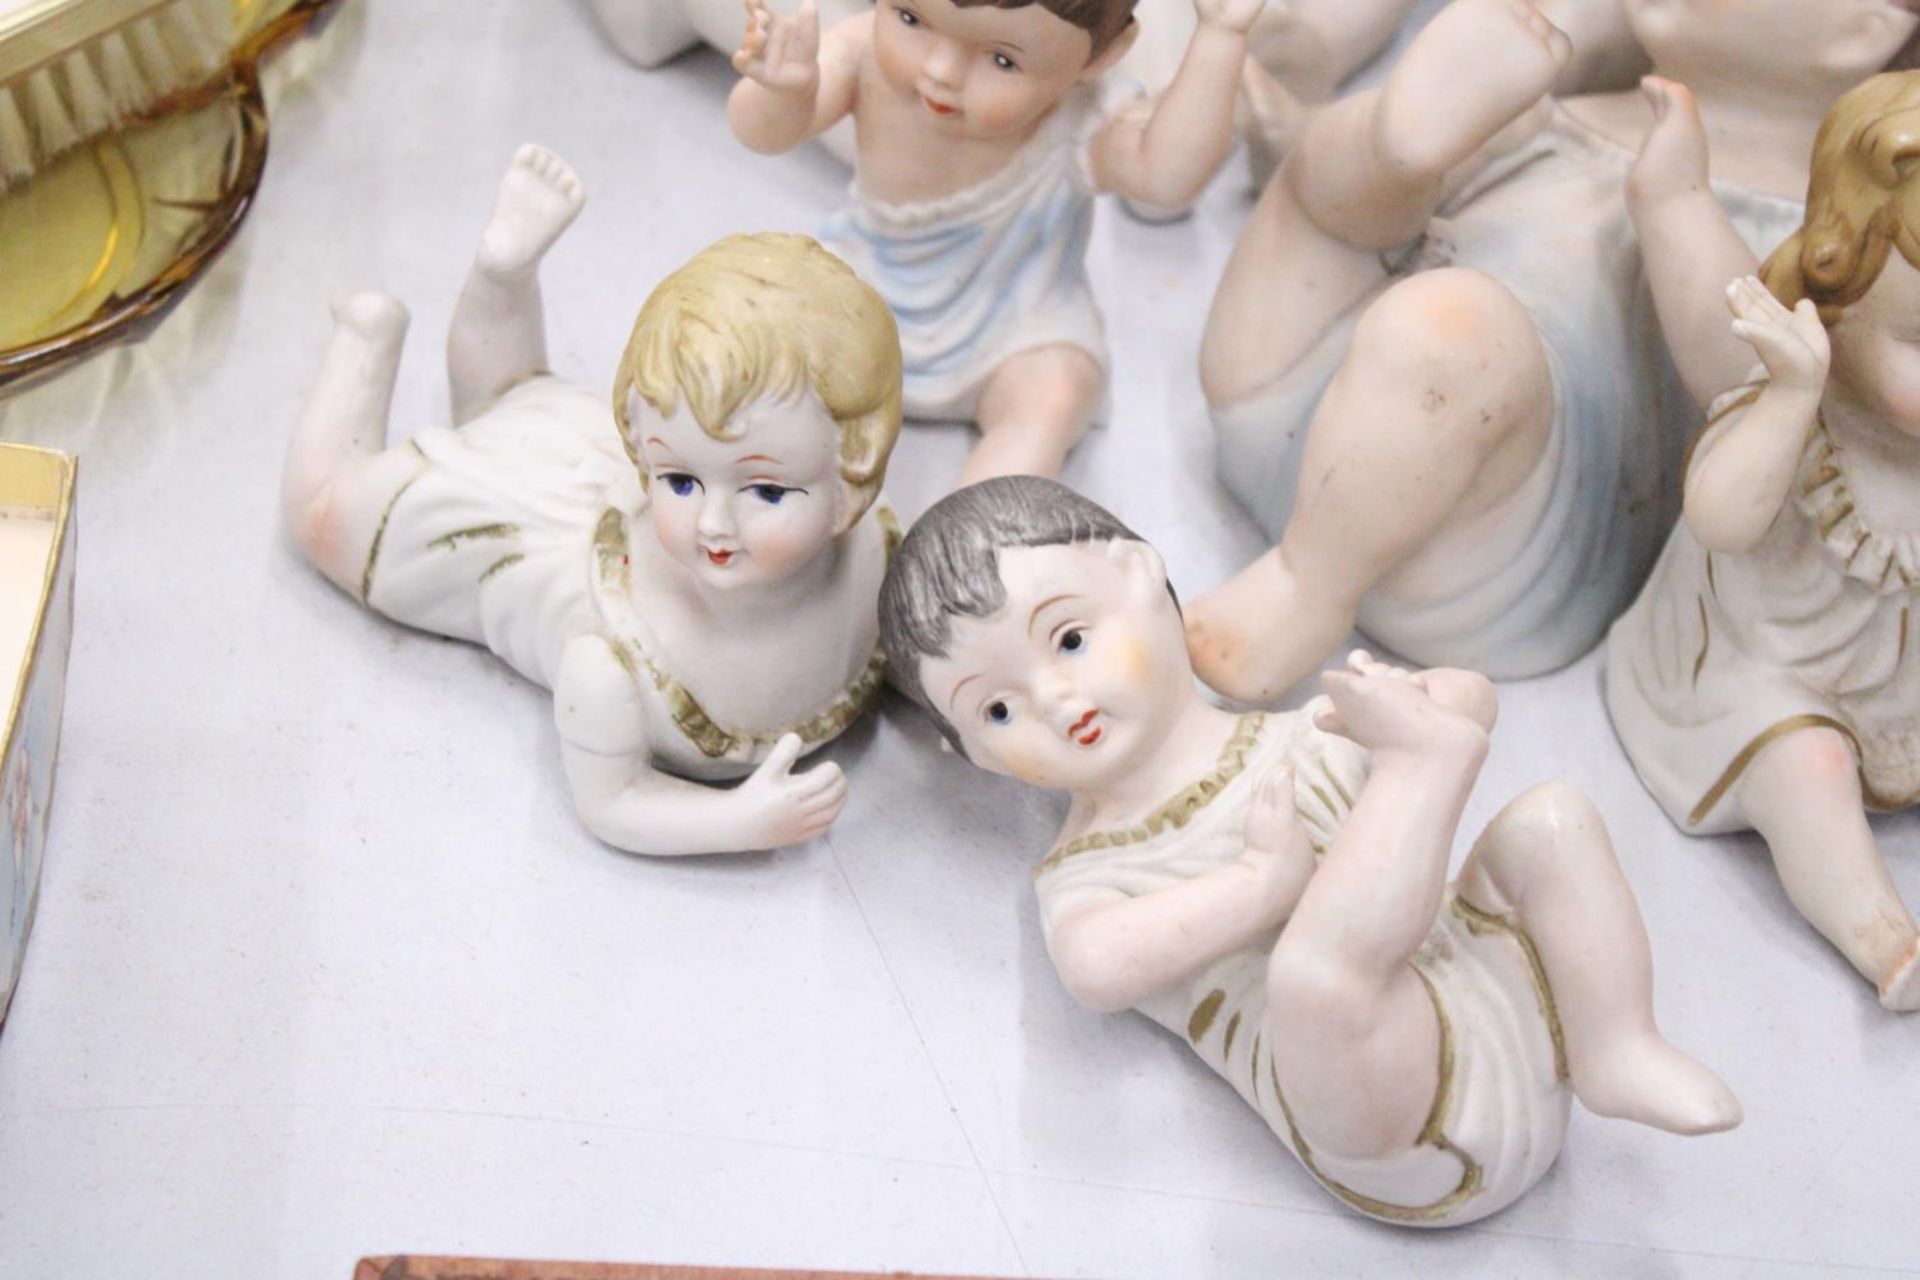 THREE LARGE AND FOUR SMALL ANTIQUE PORCELAIN, BISQUE DOLLS - Image 4 of 5